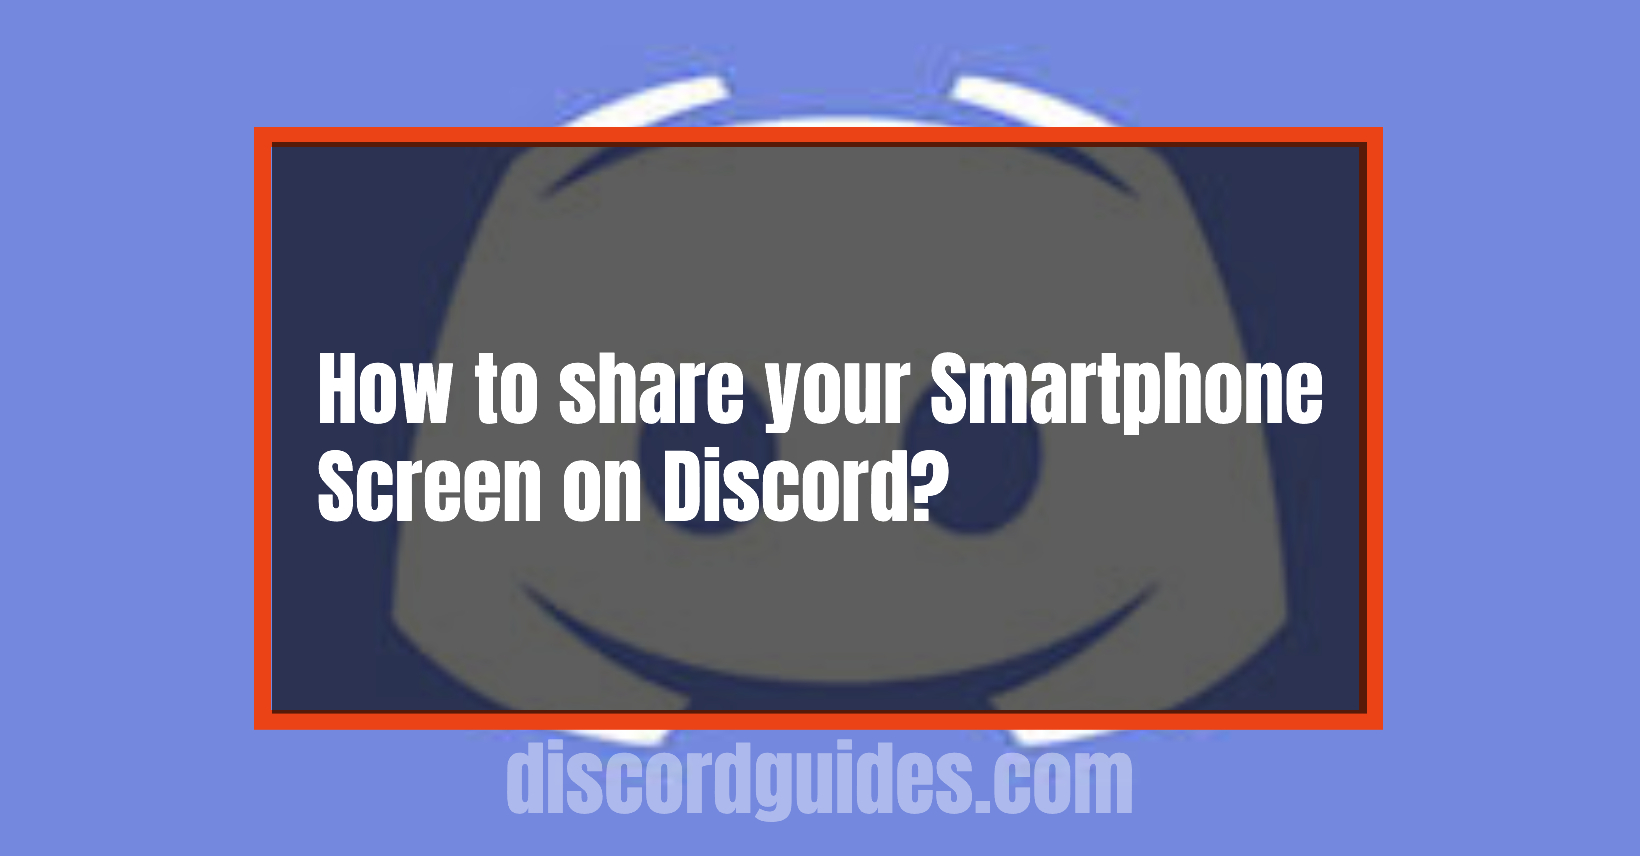 How to Share Smartphone Screen on Discord App?